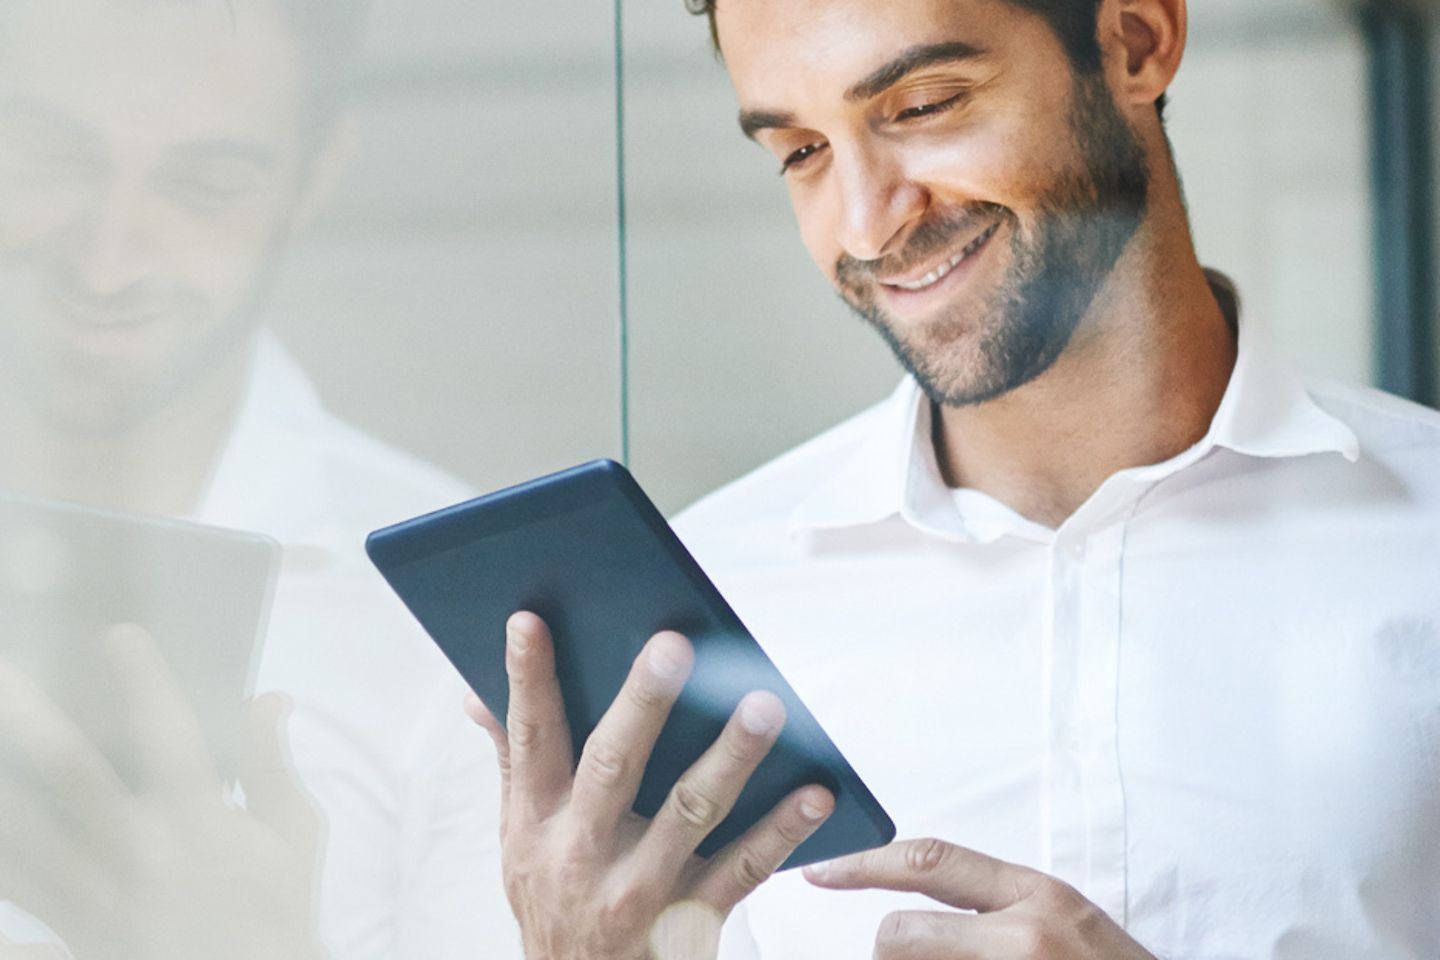 Smiling businessman leans against glass pane and looks at tablet